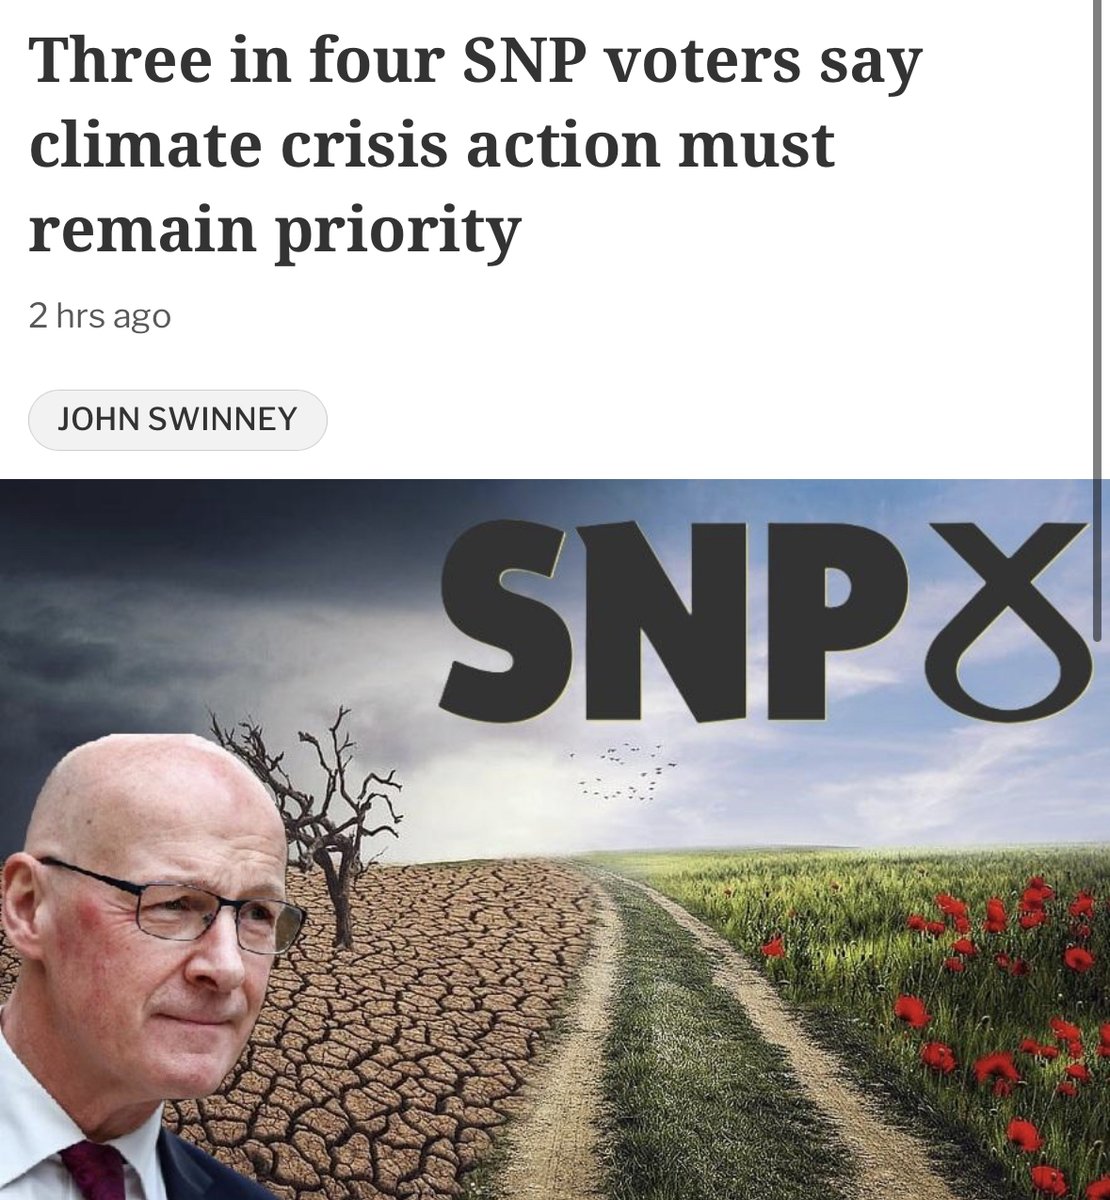 🏴󠁧󠁢󠁳󠁣󠁴󠁿 NEW: Two-thirds (61%) of all Scots want climate change to remain a high priority for the Scottish government. Scotland deserves a managed green transition - not rollbacks of climate measures which will trap oil and gas workers in a dying industry.